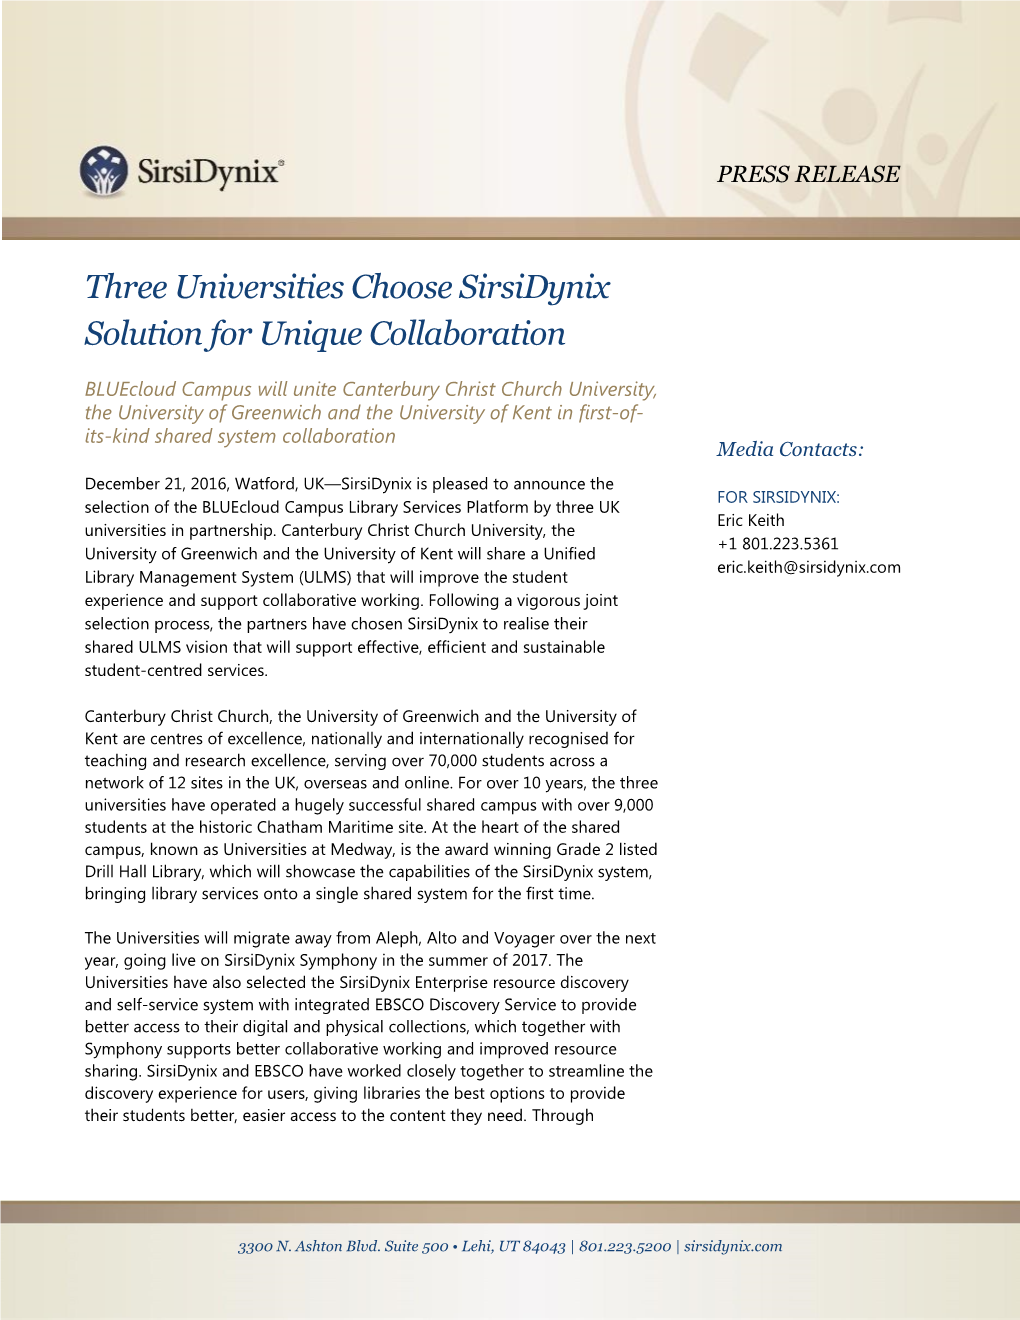 Three Universities Choose Sirsidynix Solution for Unique Collaboration